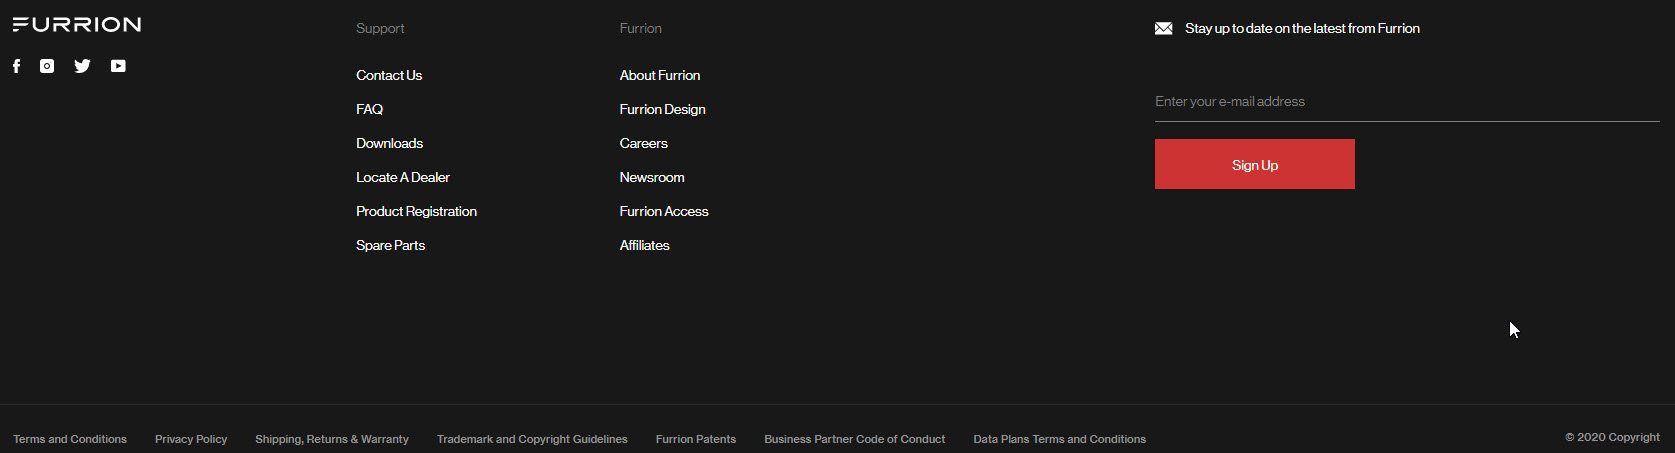 furrion website footer navigation example call to action